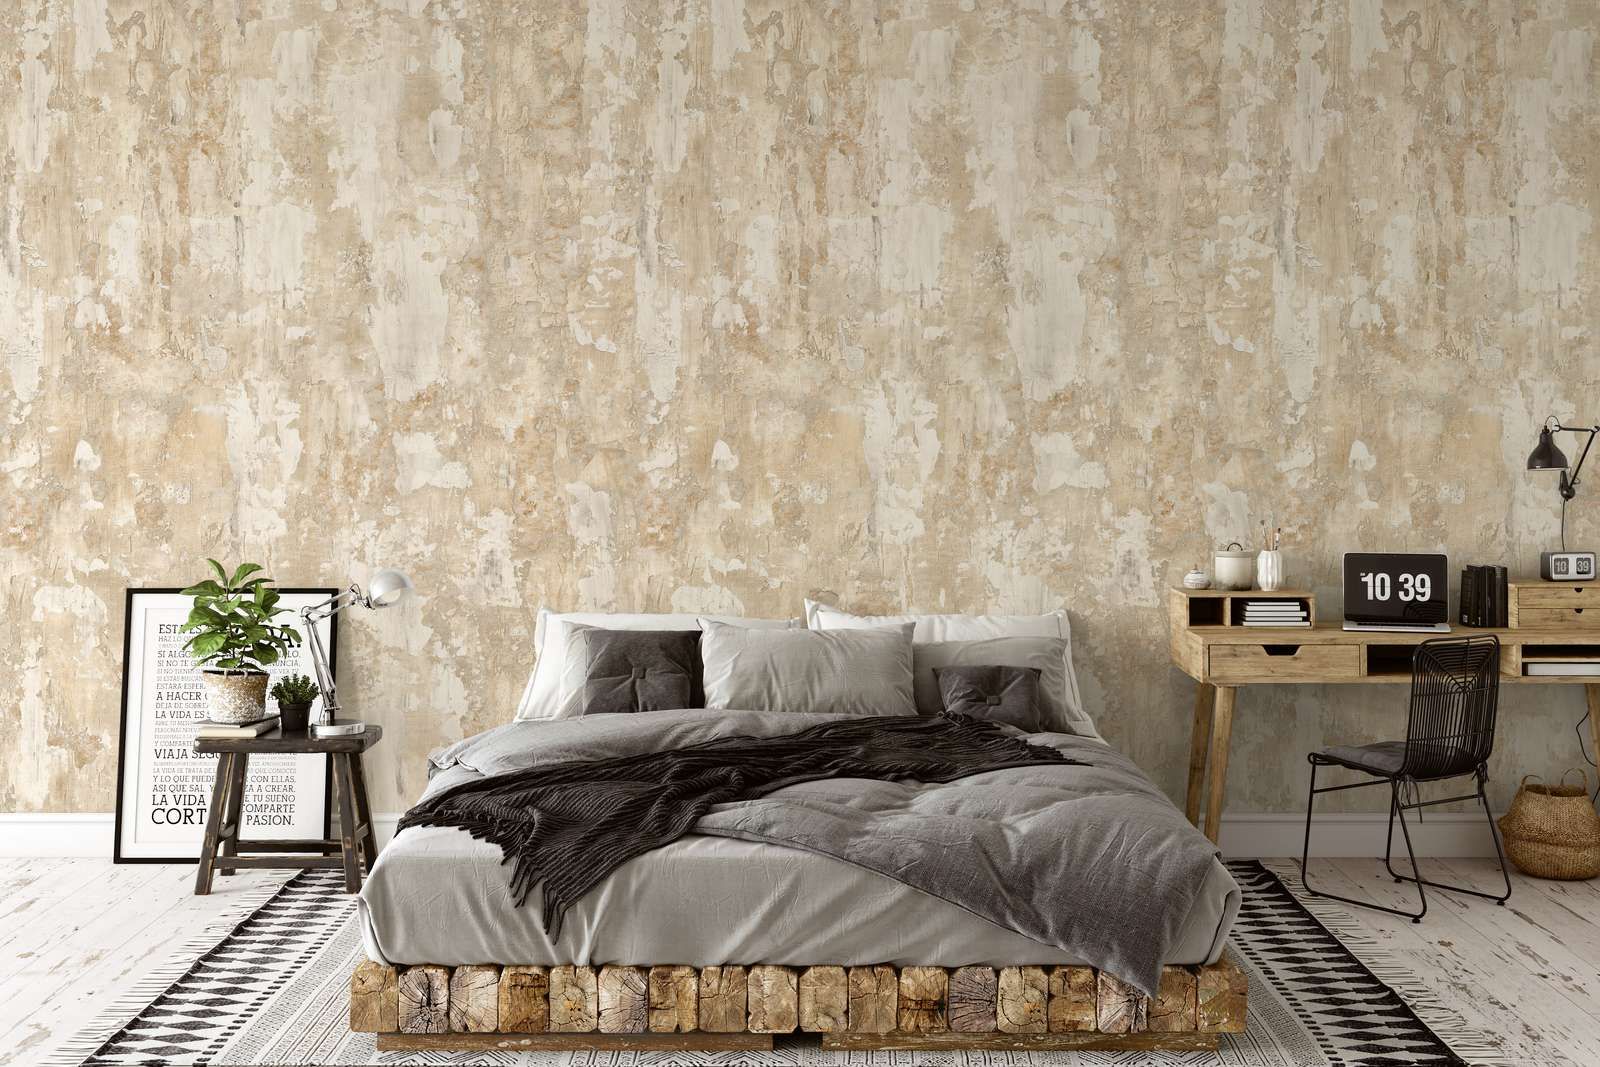             Non-woven wallpaper with vintage concrete look - beige, grey
        